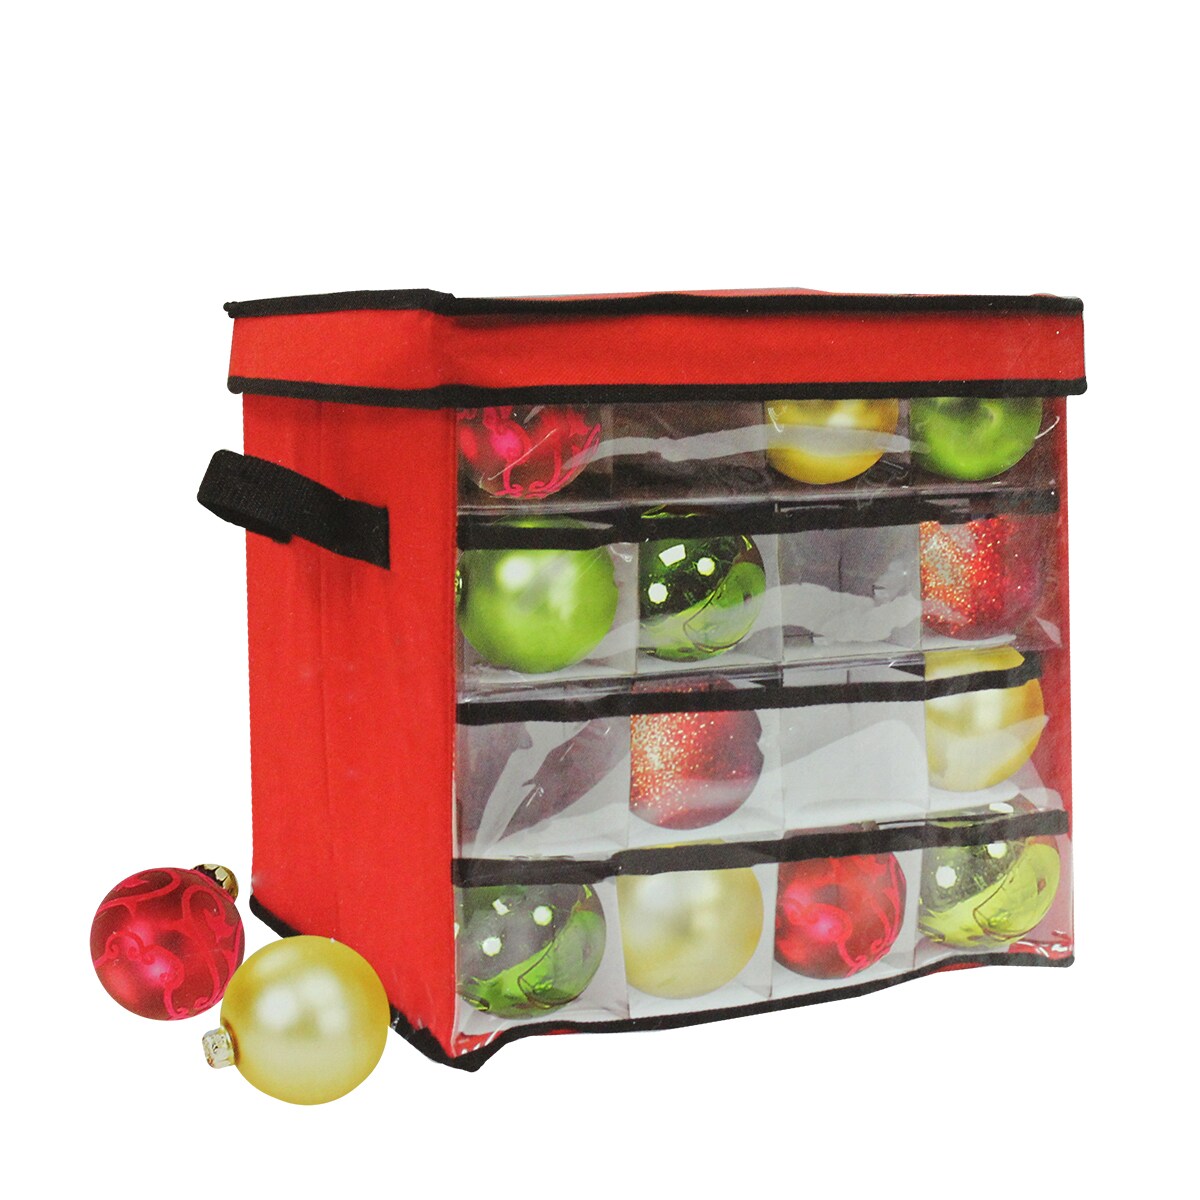 Christmas Food Storage, Shop All Food Storage Containers